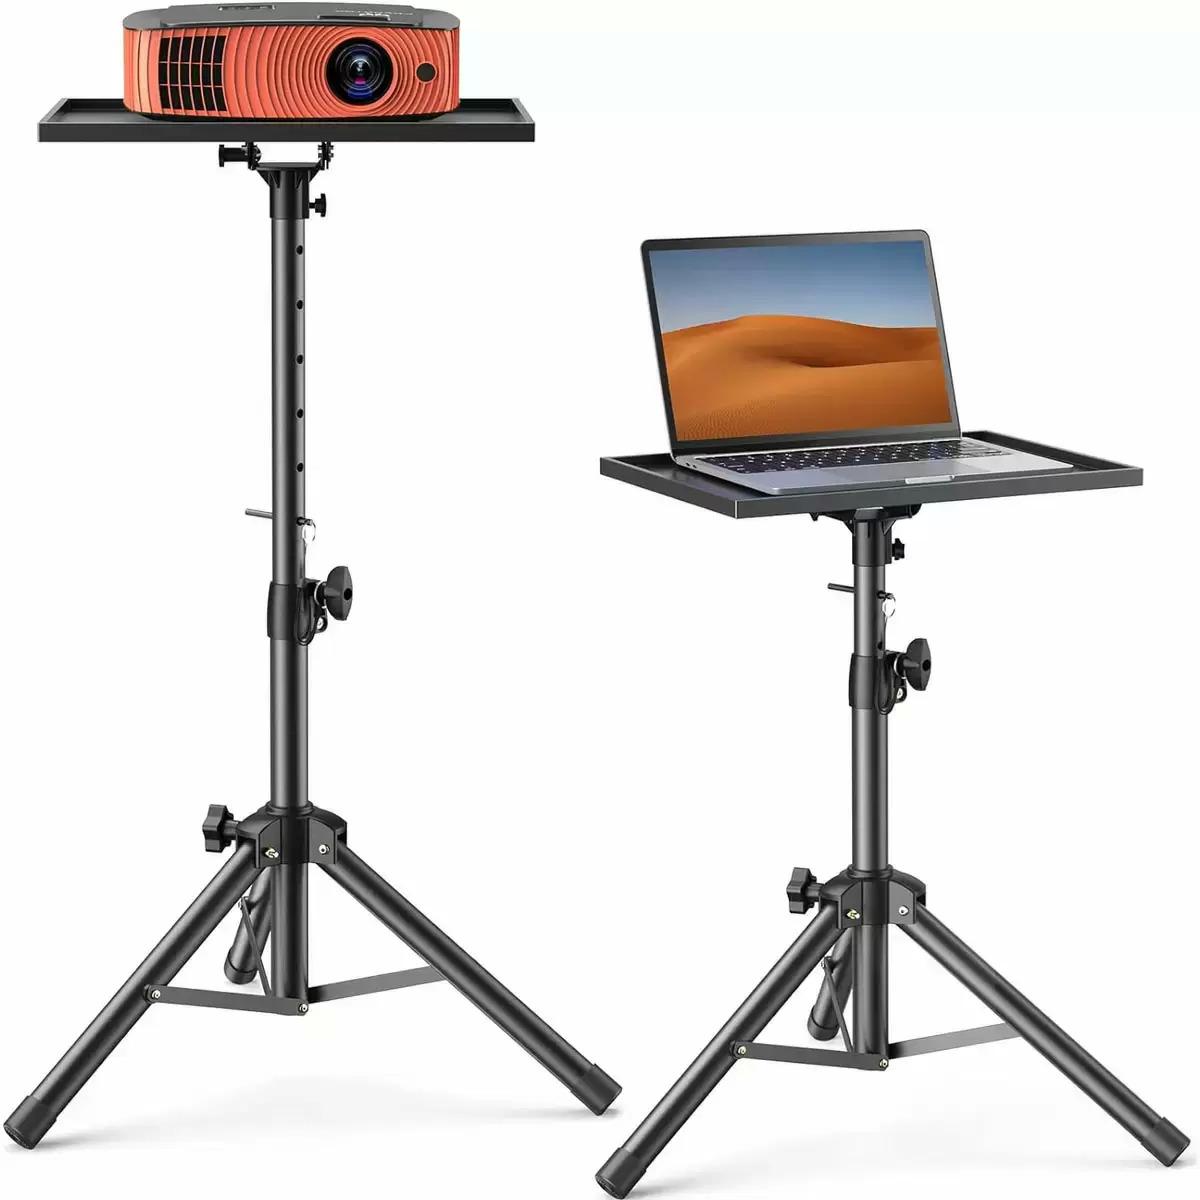 Amada Foldable Adjustable Projector Tripod Stand for $17.99